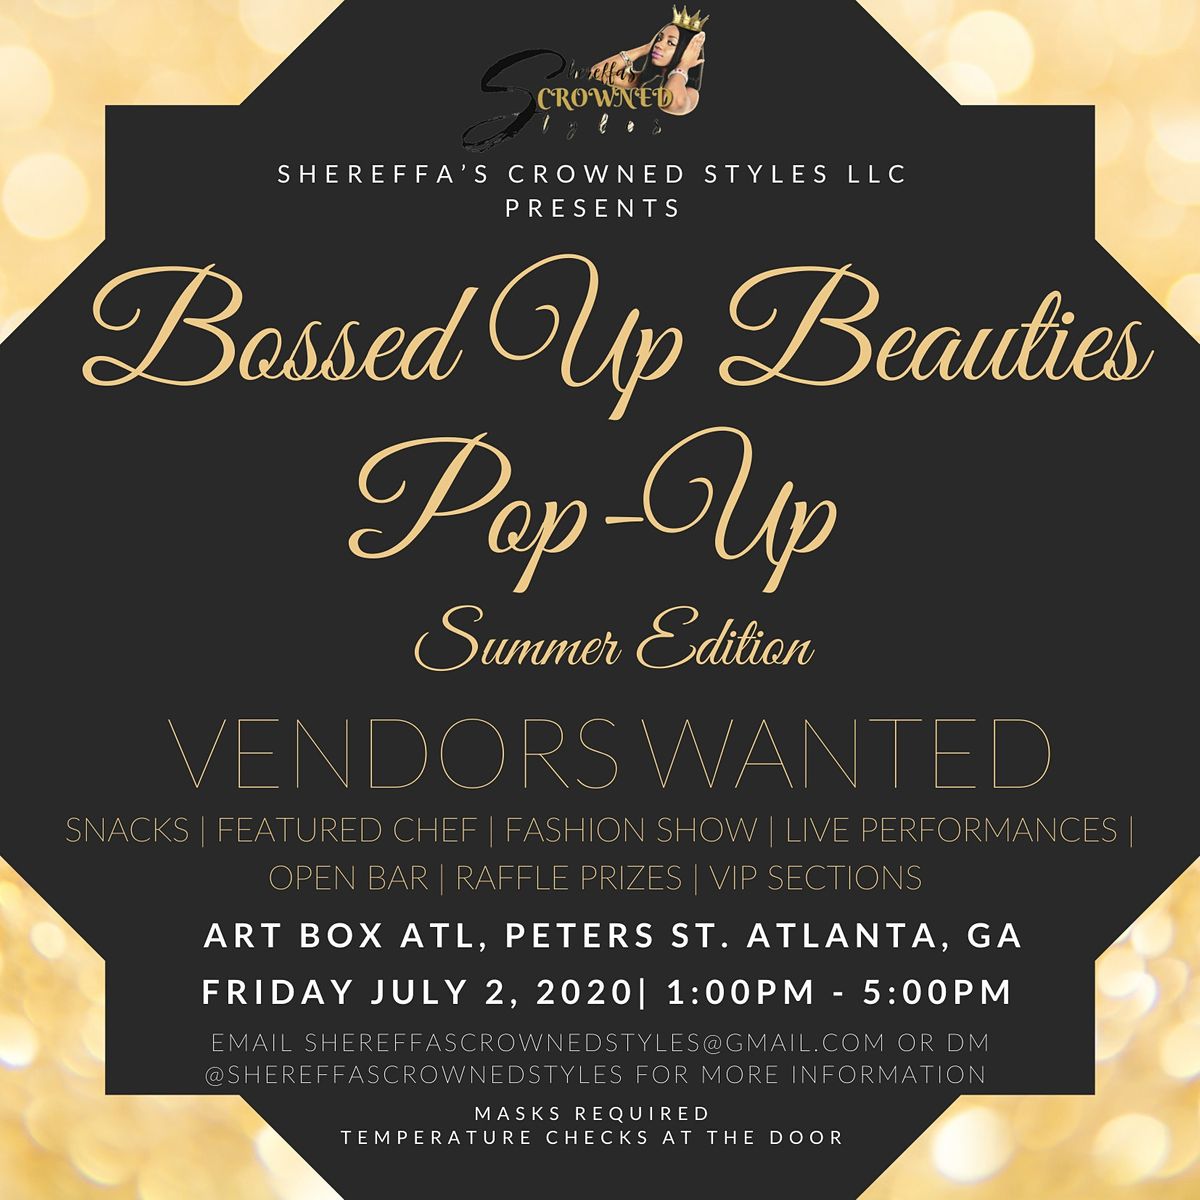 Bossed Up Beauties Pop-Up Shop Summer Edition VENDORS WANTED!